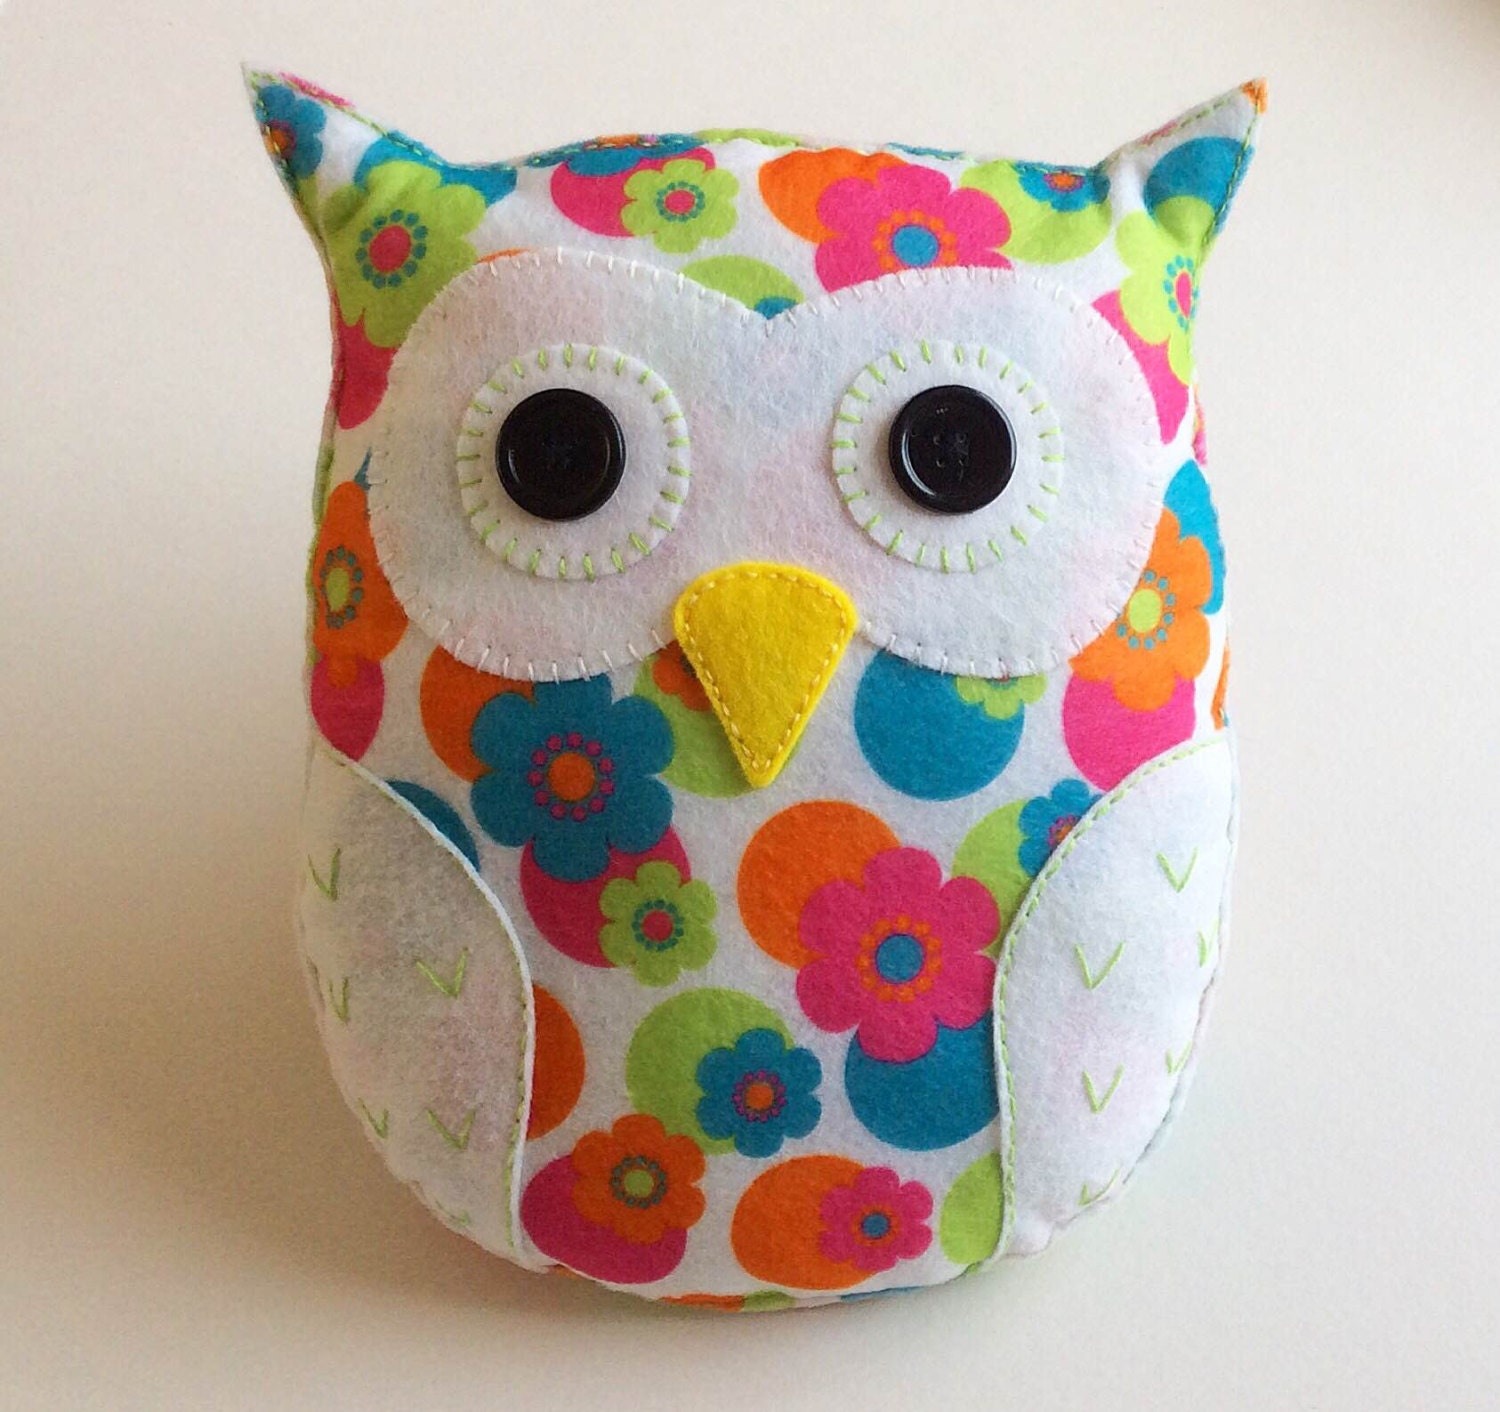 flora-the-owl-pdf-sewing-pattern-and-tutorial-instant